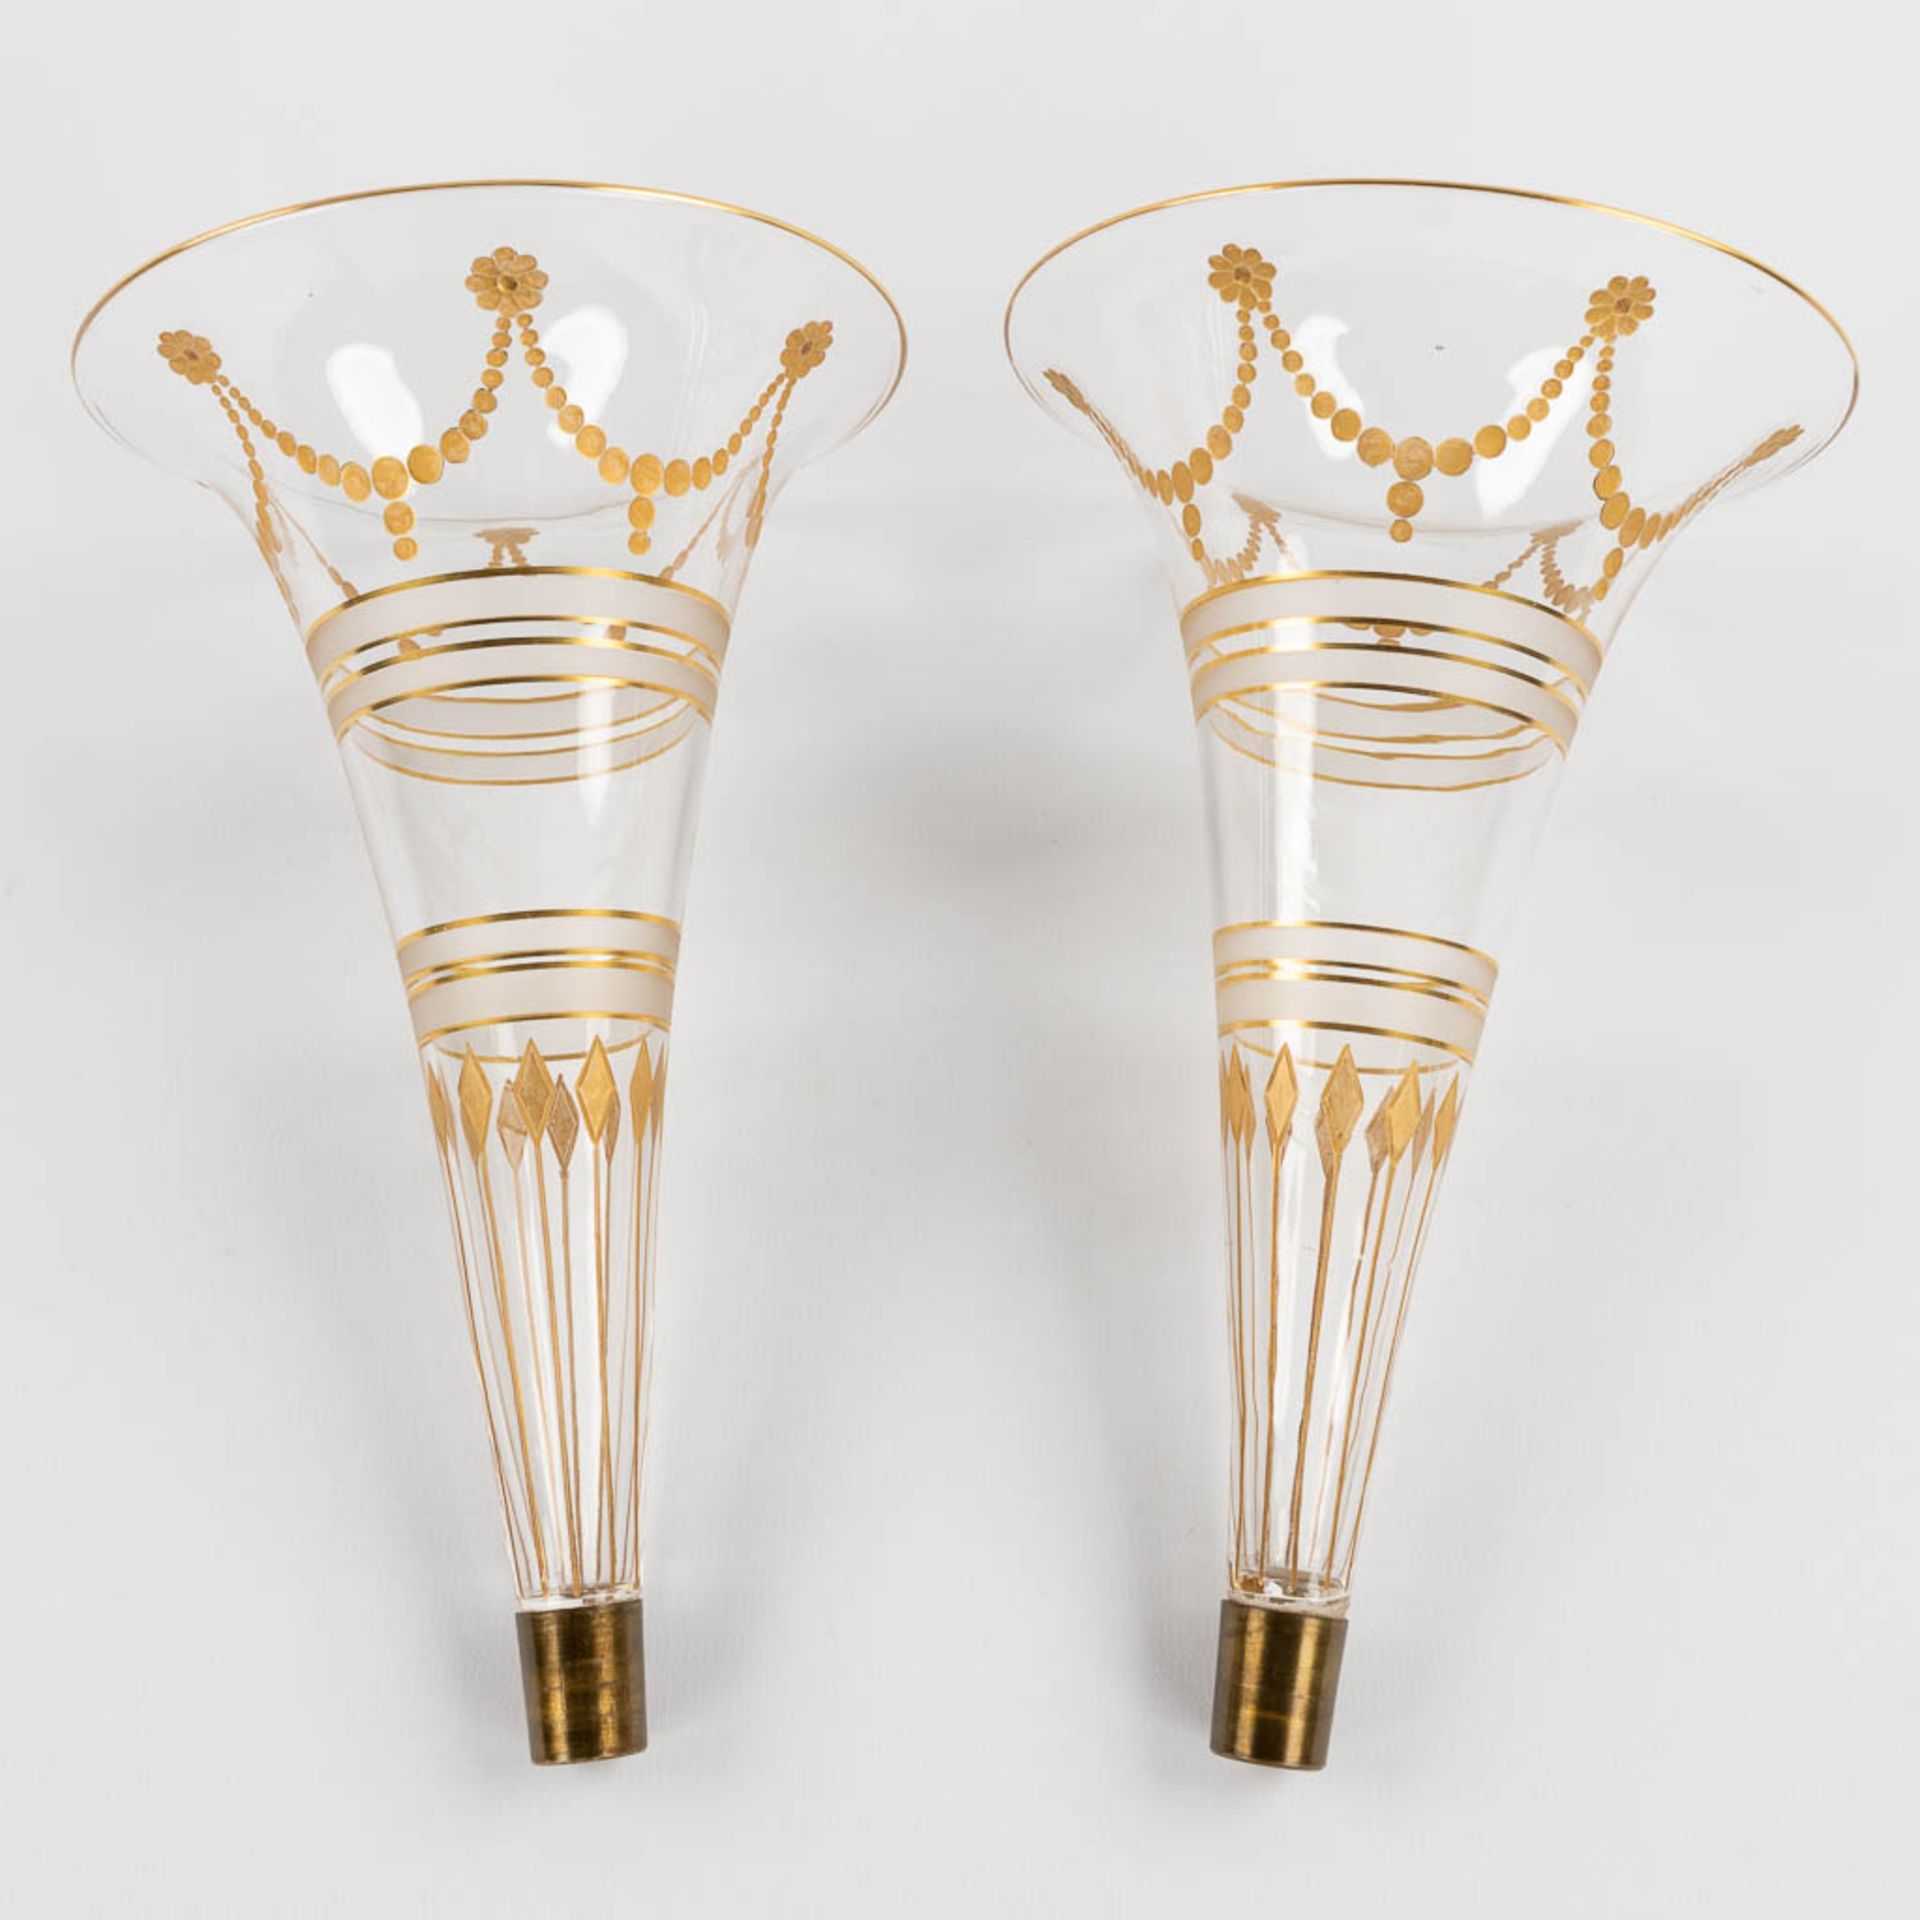 A pair of trumpet vases, gilt bronze and glass in Louis XVI style. 19th C. (H:31,5 x D:13 cm) - Image 11 of 13